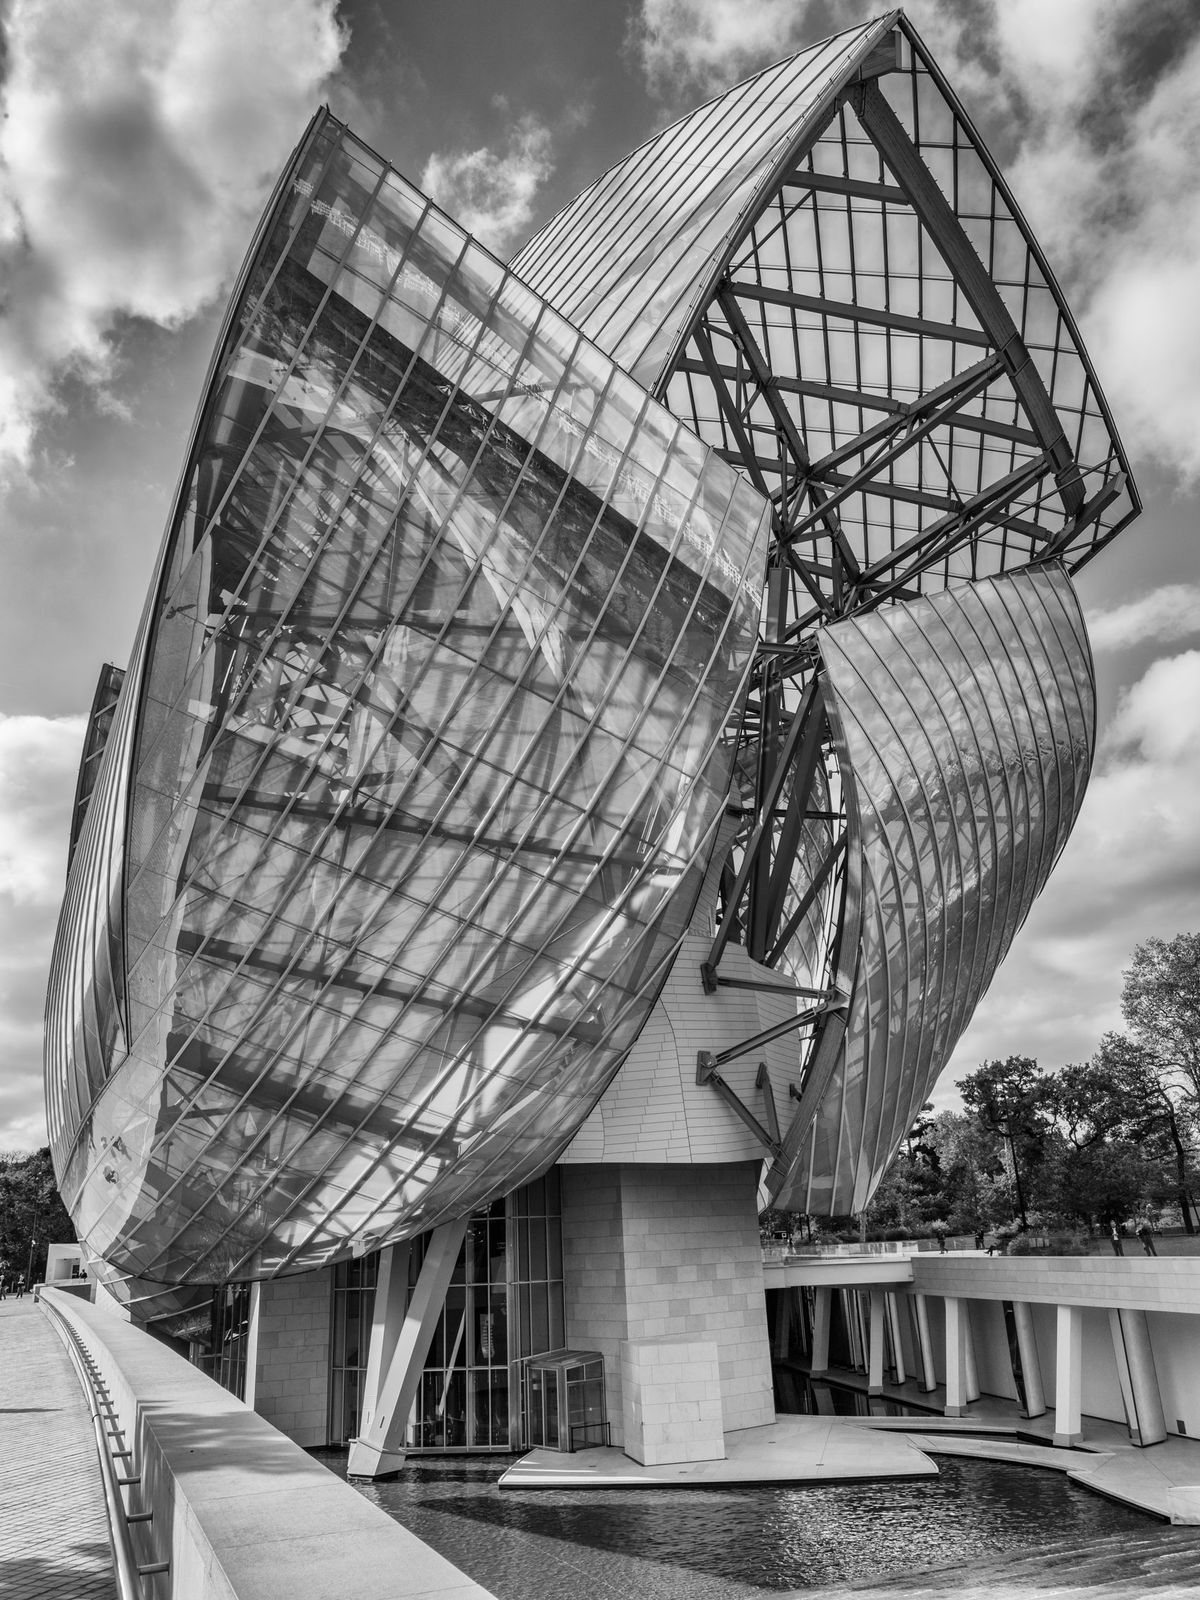 Louis Vuitton Foundation-Frank Gehry, Paris # 2. Image by William Curtis Rolf